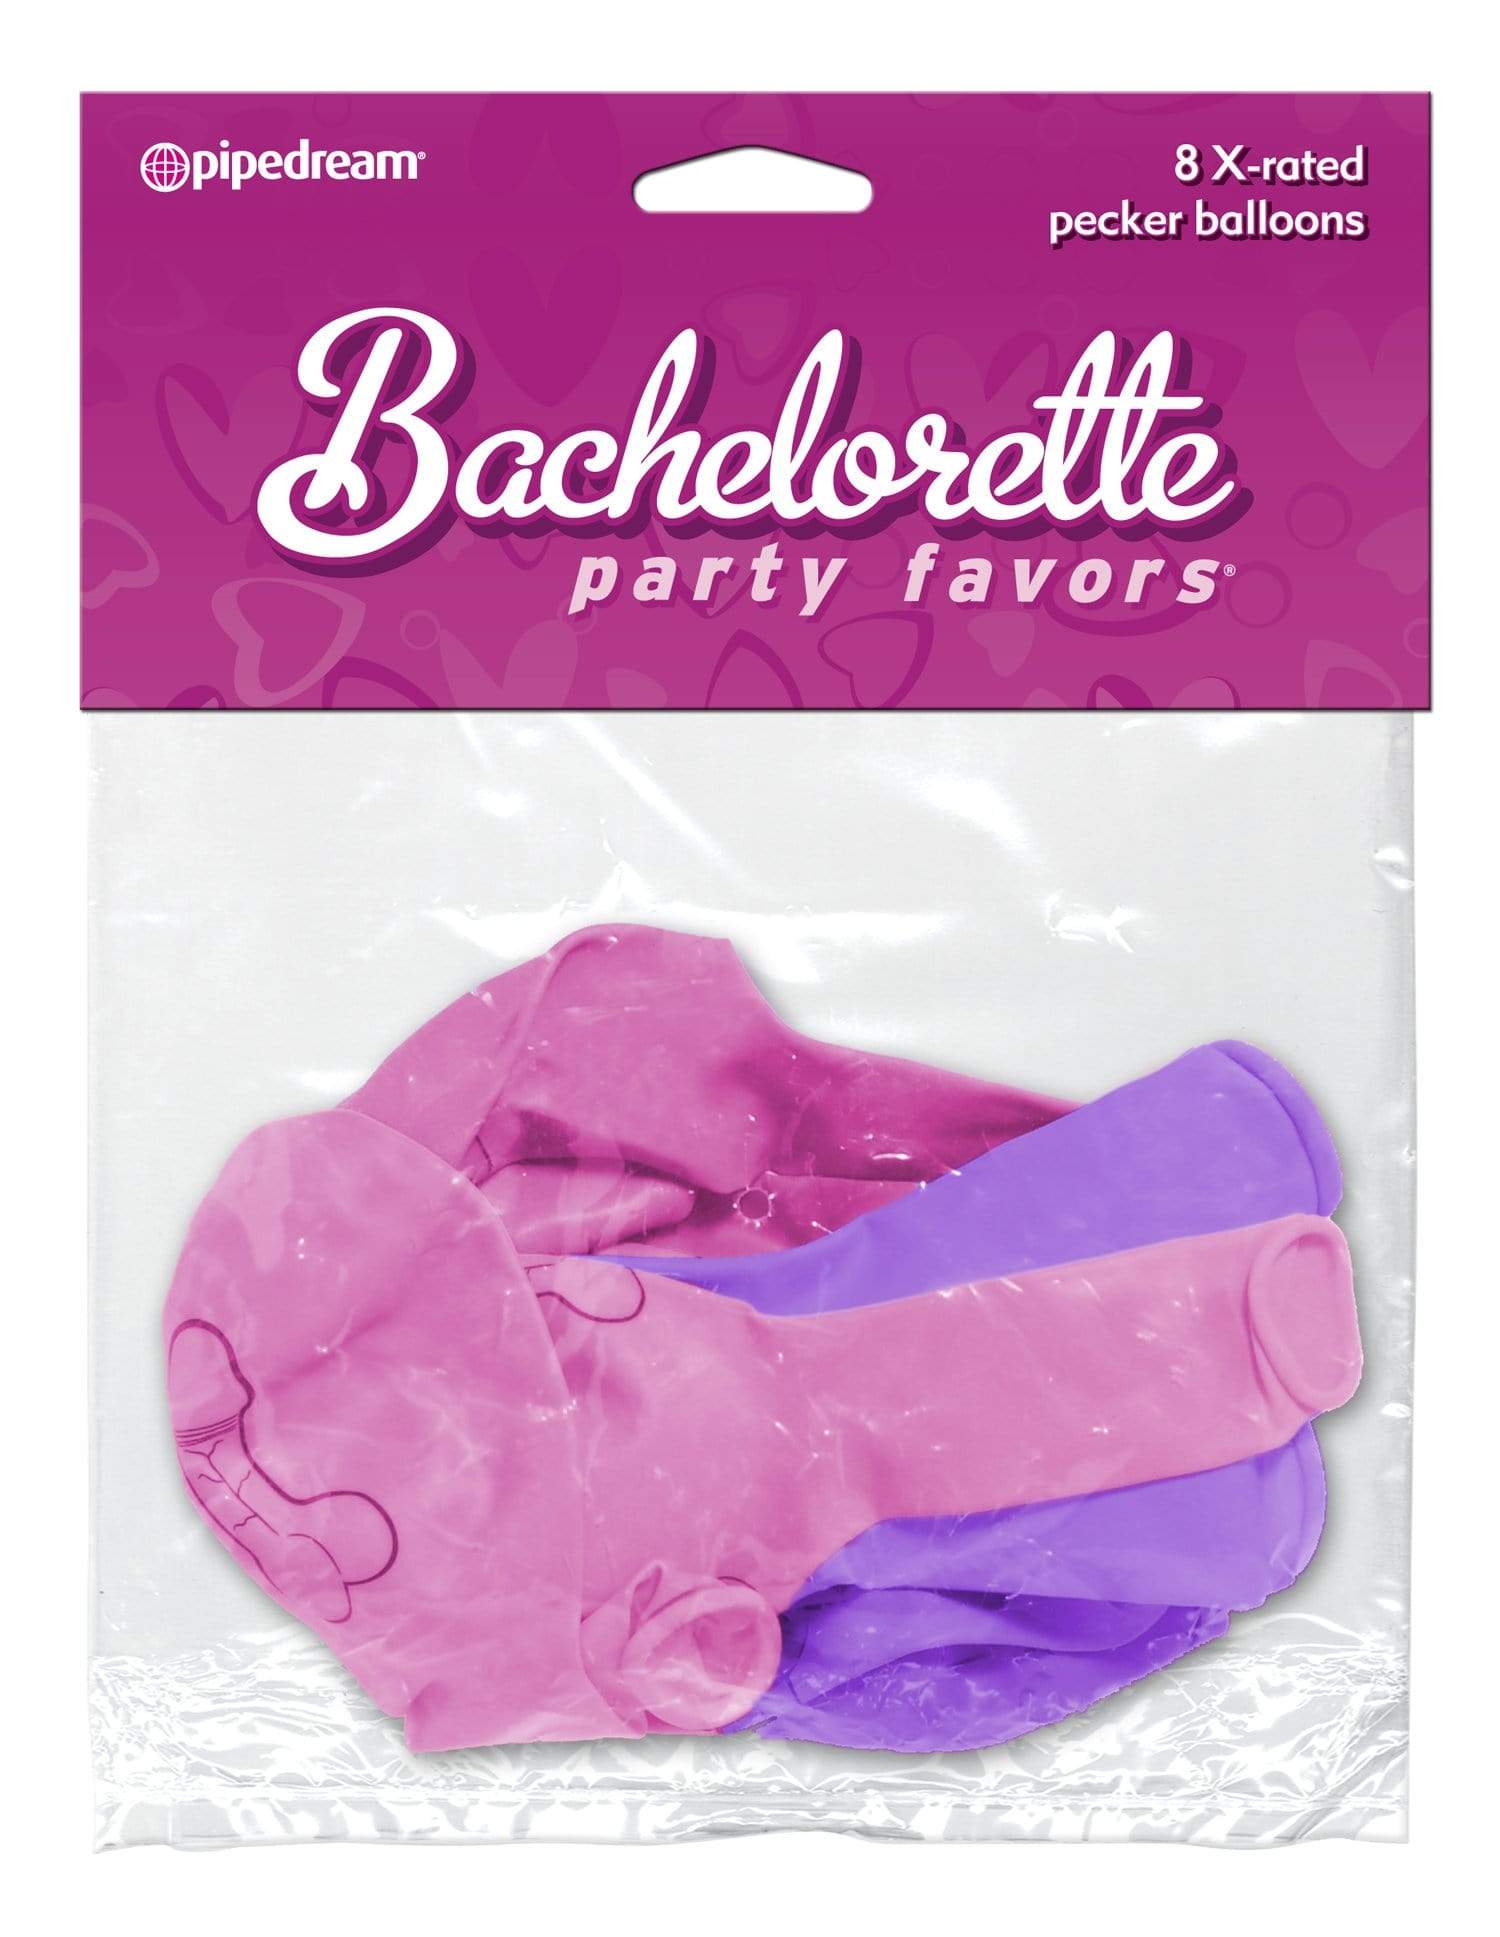 bachelorette party favors x rated pecker balloons pink and purple